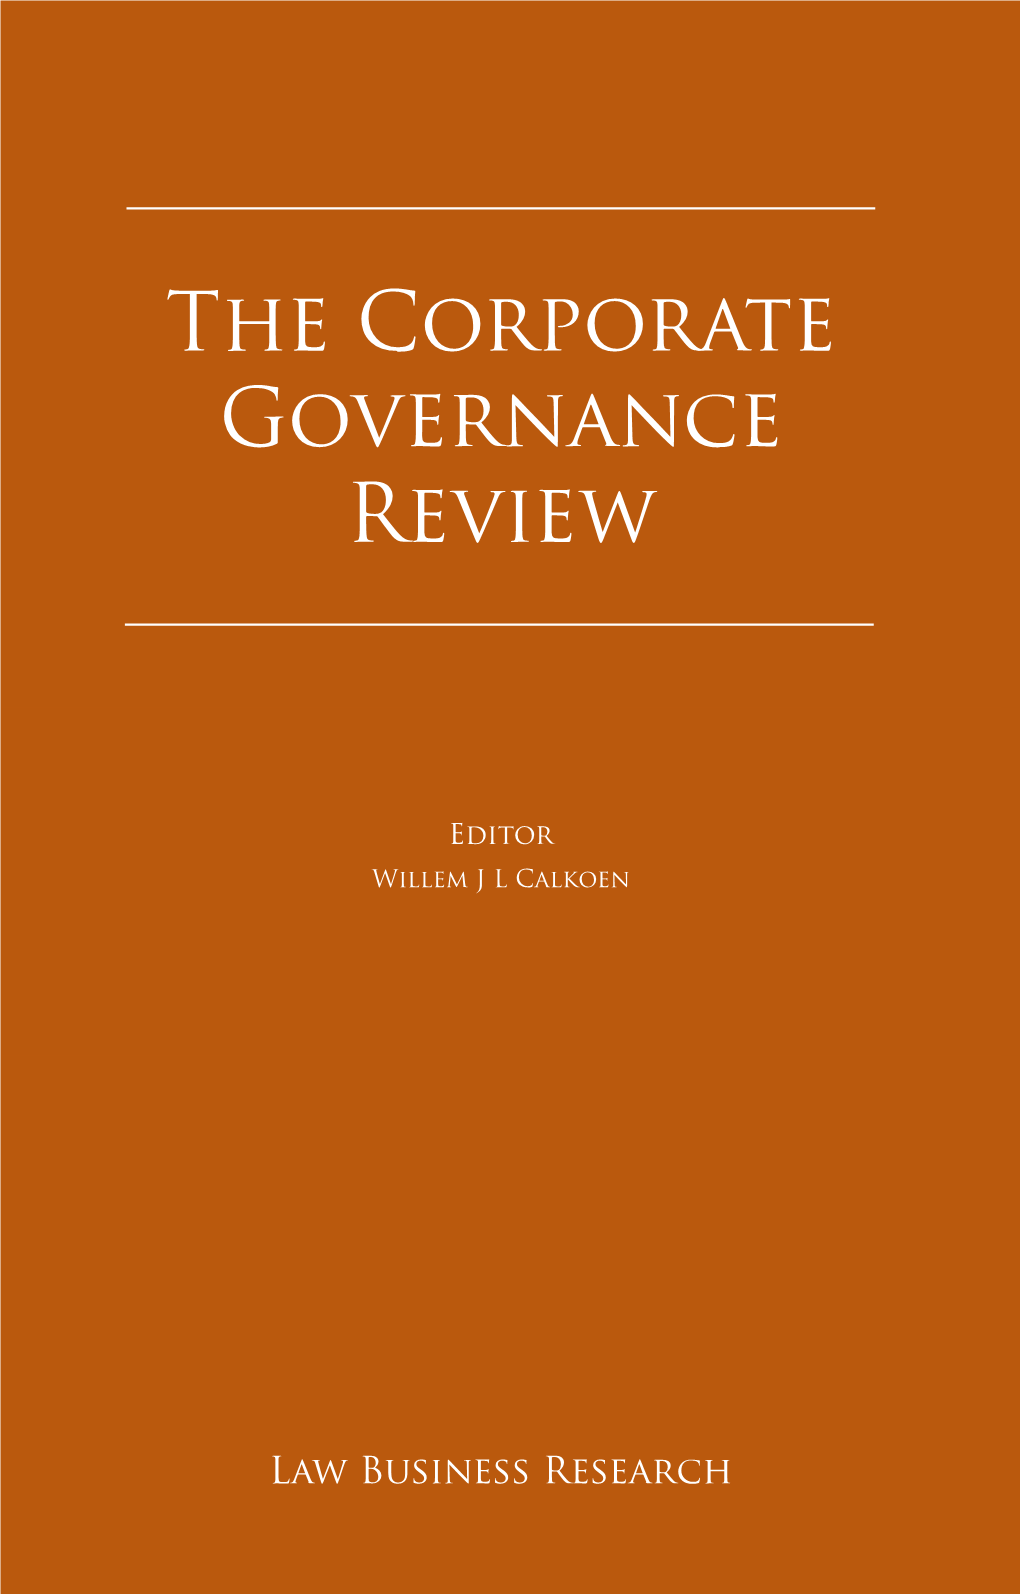 The Corporate Governance Review